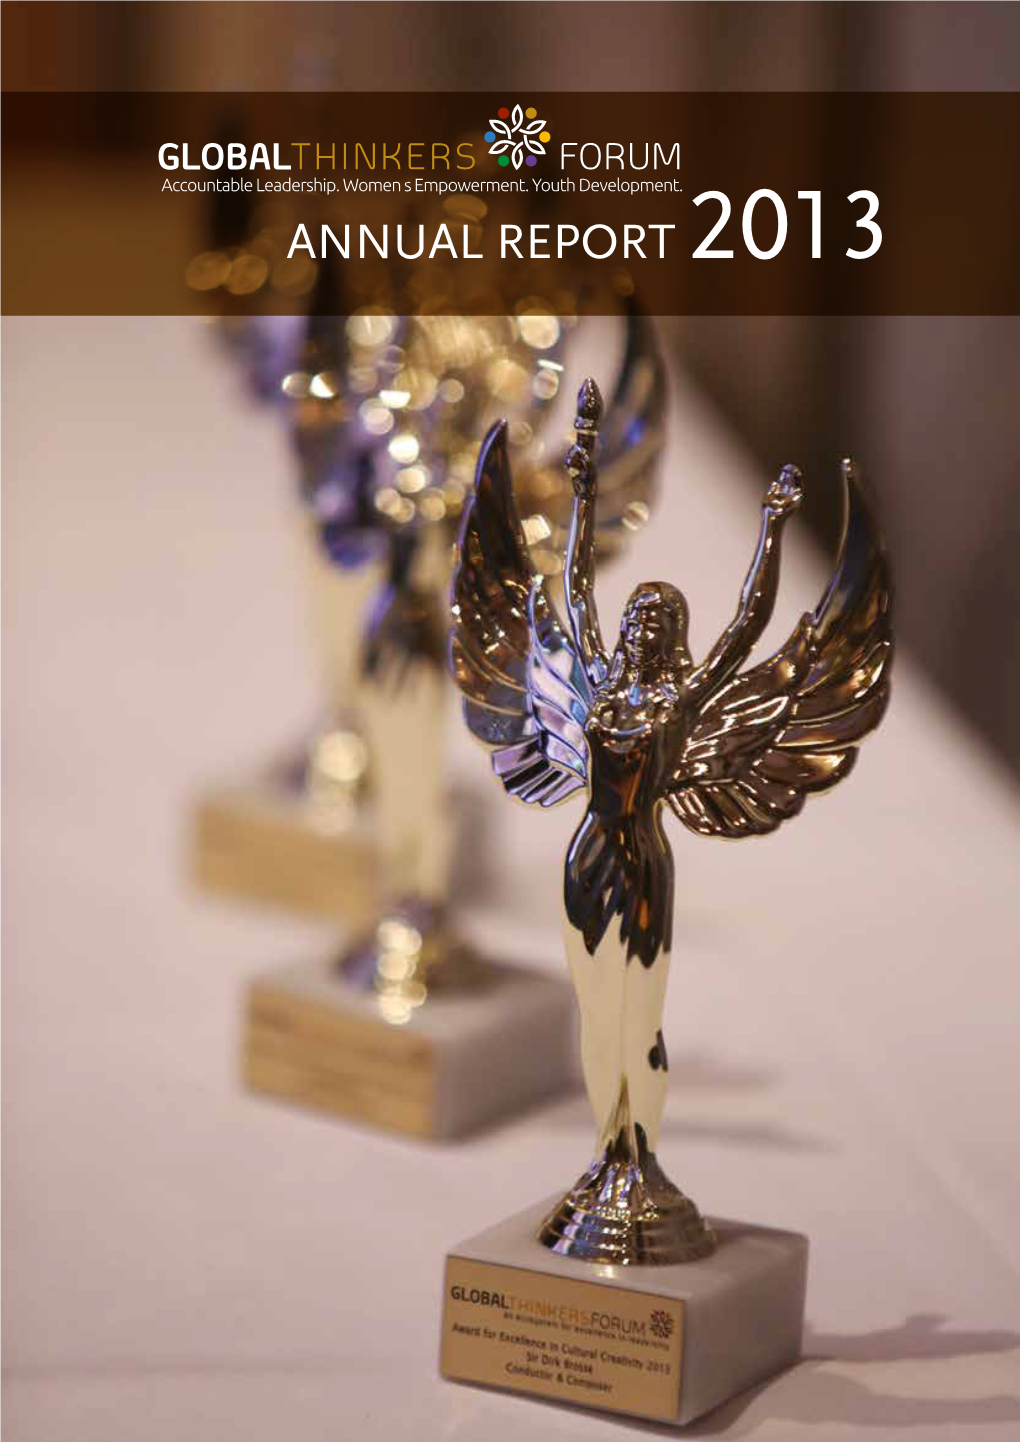 ANNUAL REPORT 2013 Traditionally a Leader Is One “Who Commands Power and Guides Others